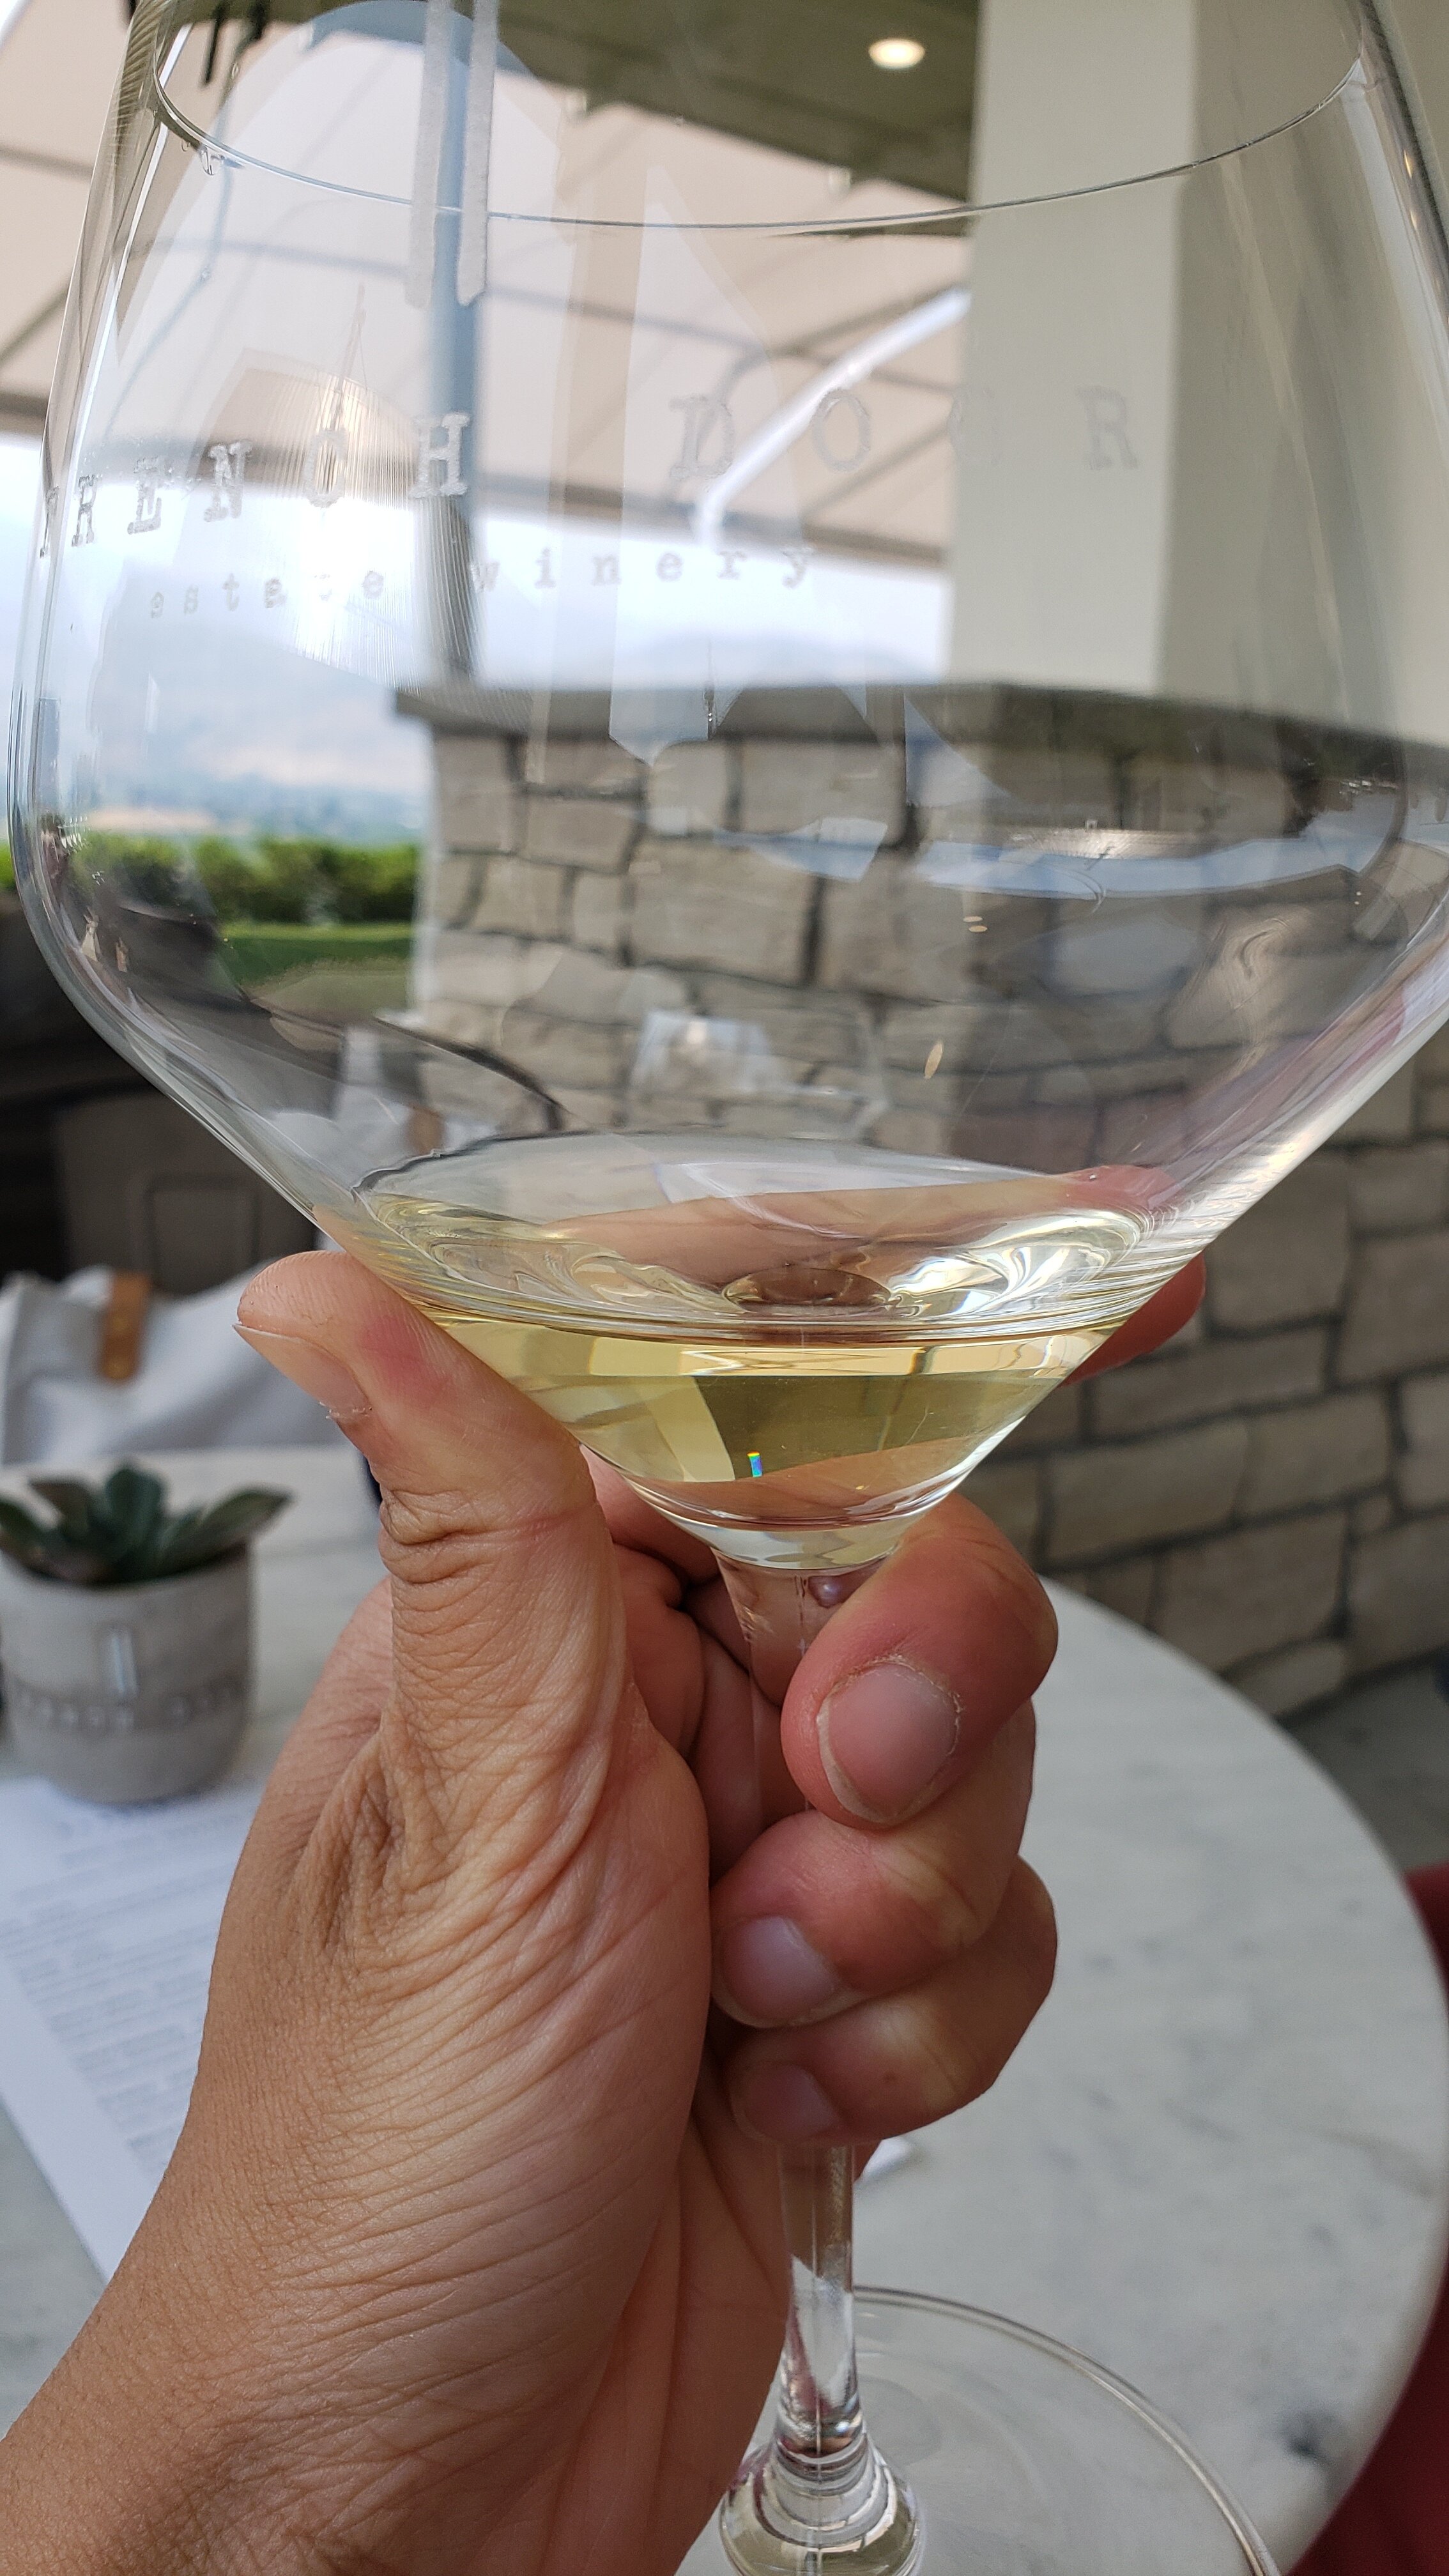 Enjoying a glass of Lys during the tasting